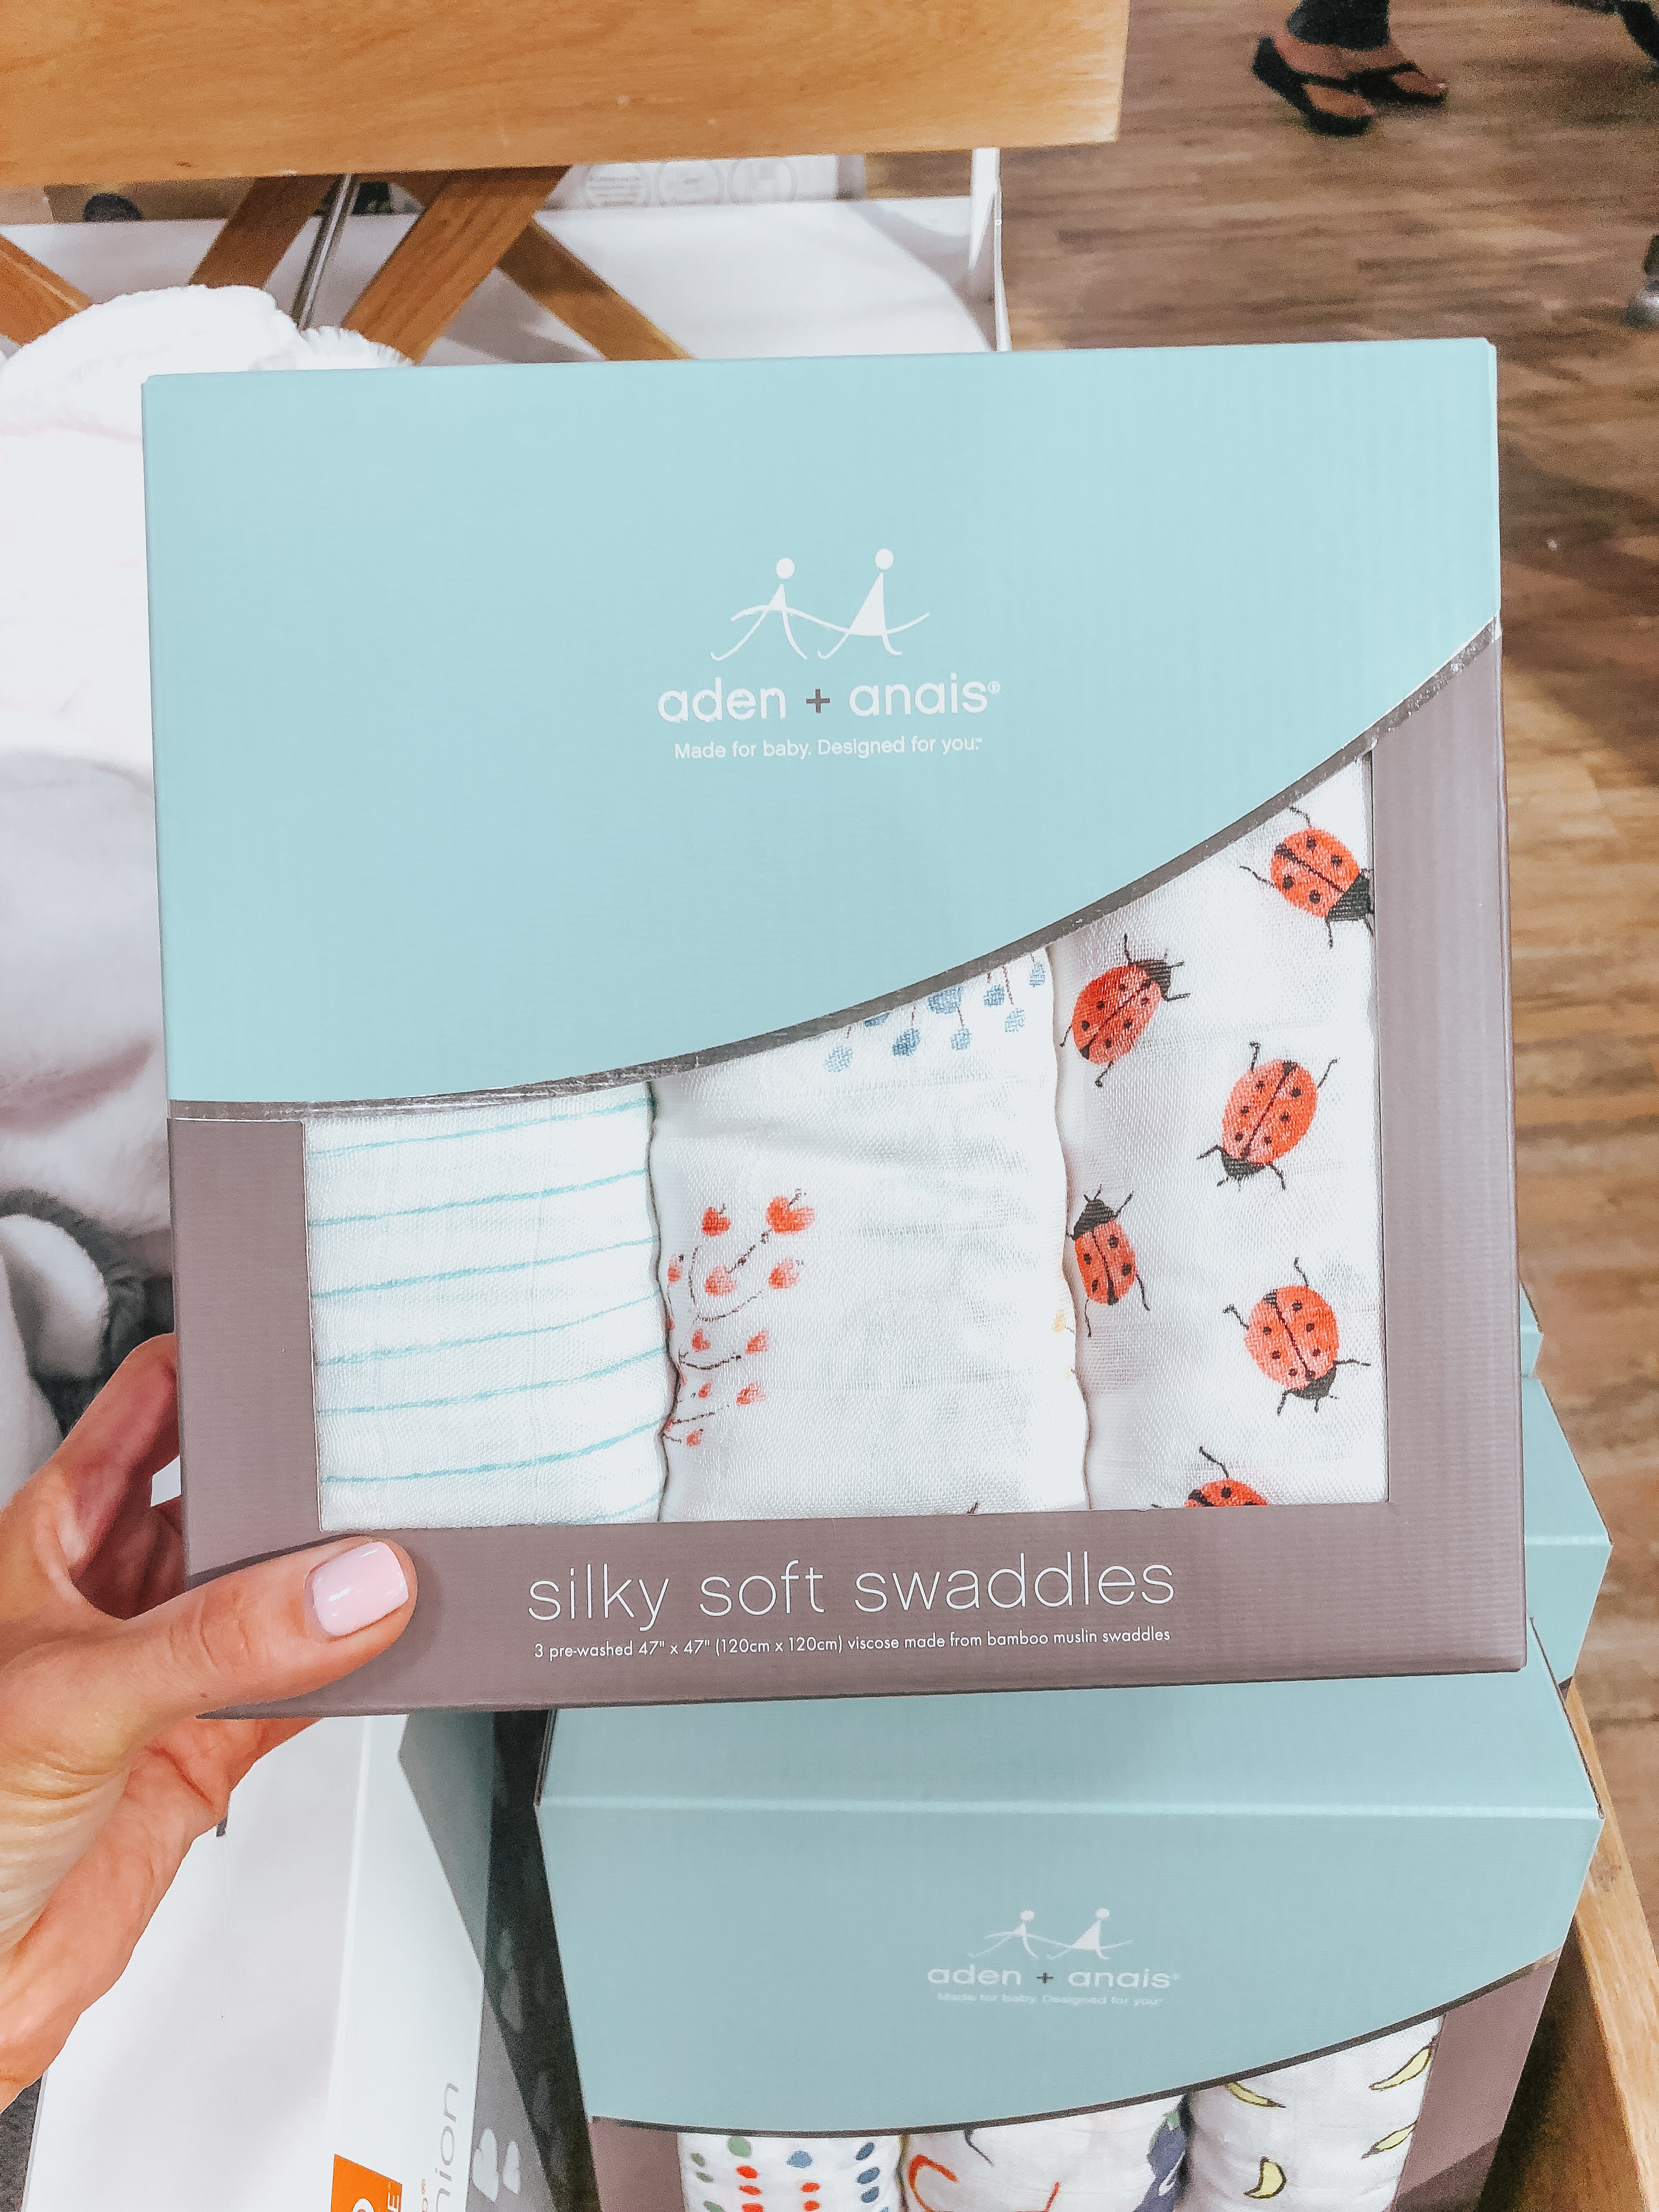 Lifestyle Blogger Katelyn Jones of A Touch of Pink Blog reviews the Aden and Anais silky soft swaddles set from the Nordstrom Anniversary Sale 2018